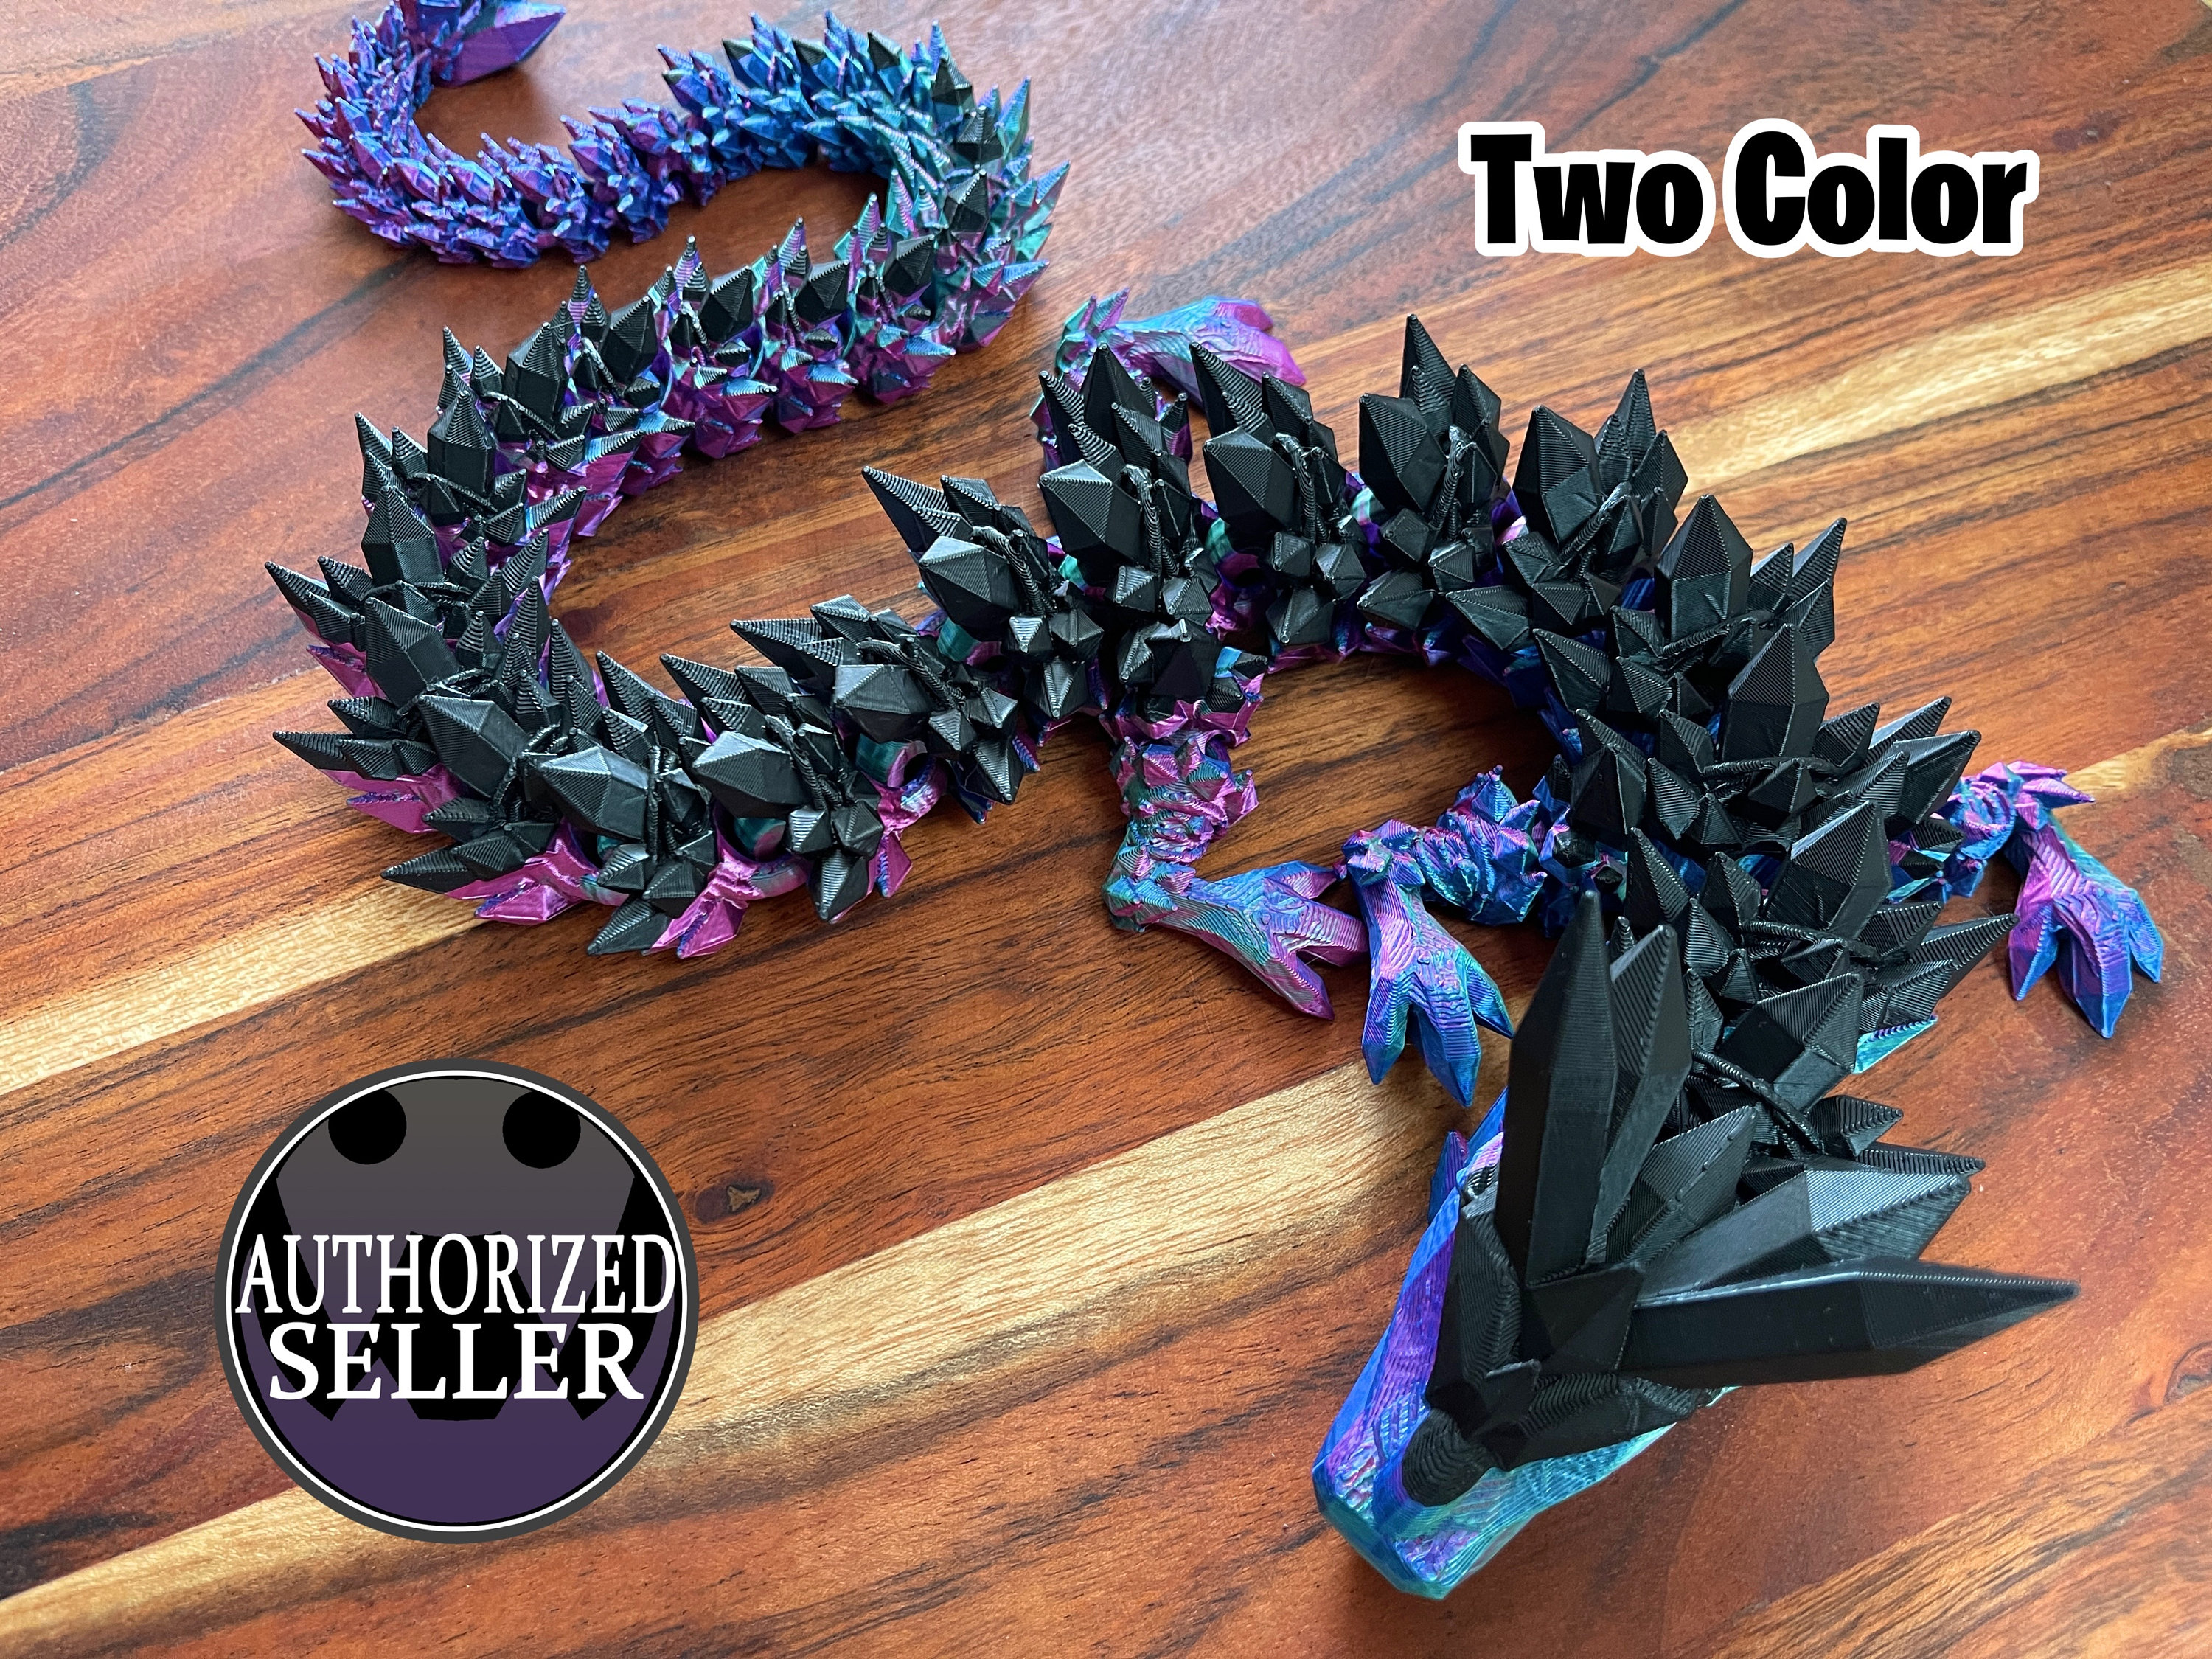 GIANT 3D Printed Crystal Dragon With Wings Articulated Fidget Desk